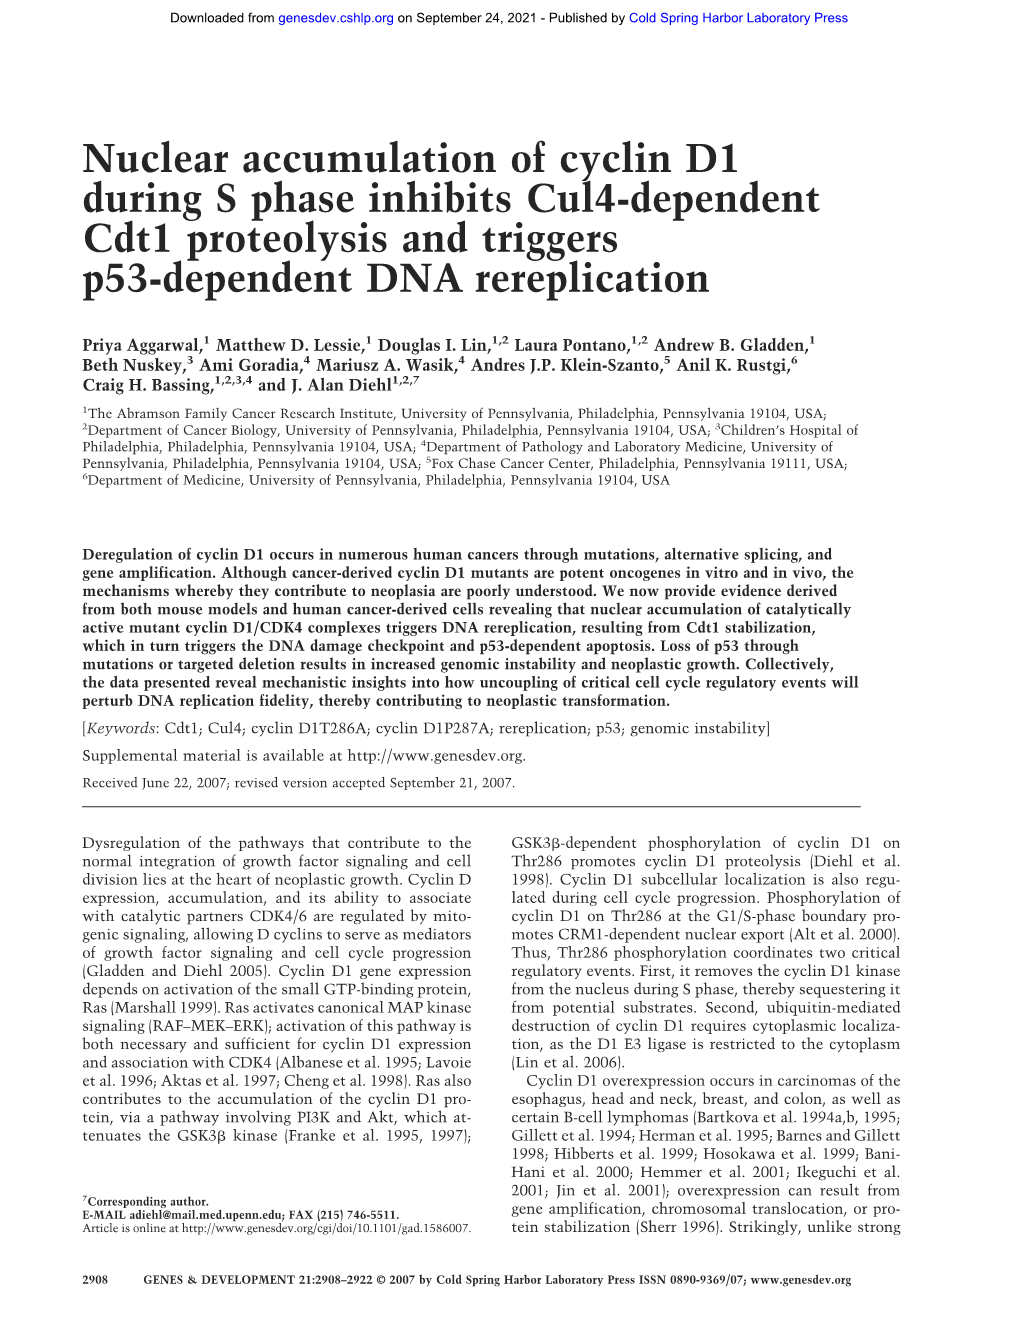 Nuclear Accumulation of Cyclin D1 During S Phase Inhibits Cul4-Dependent Cdt1 Proteolysis and Triggers P53-Dependent DNA Rereplication